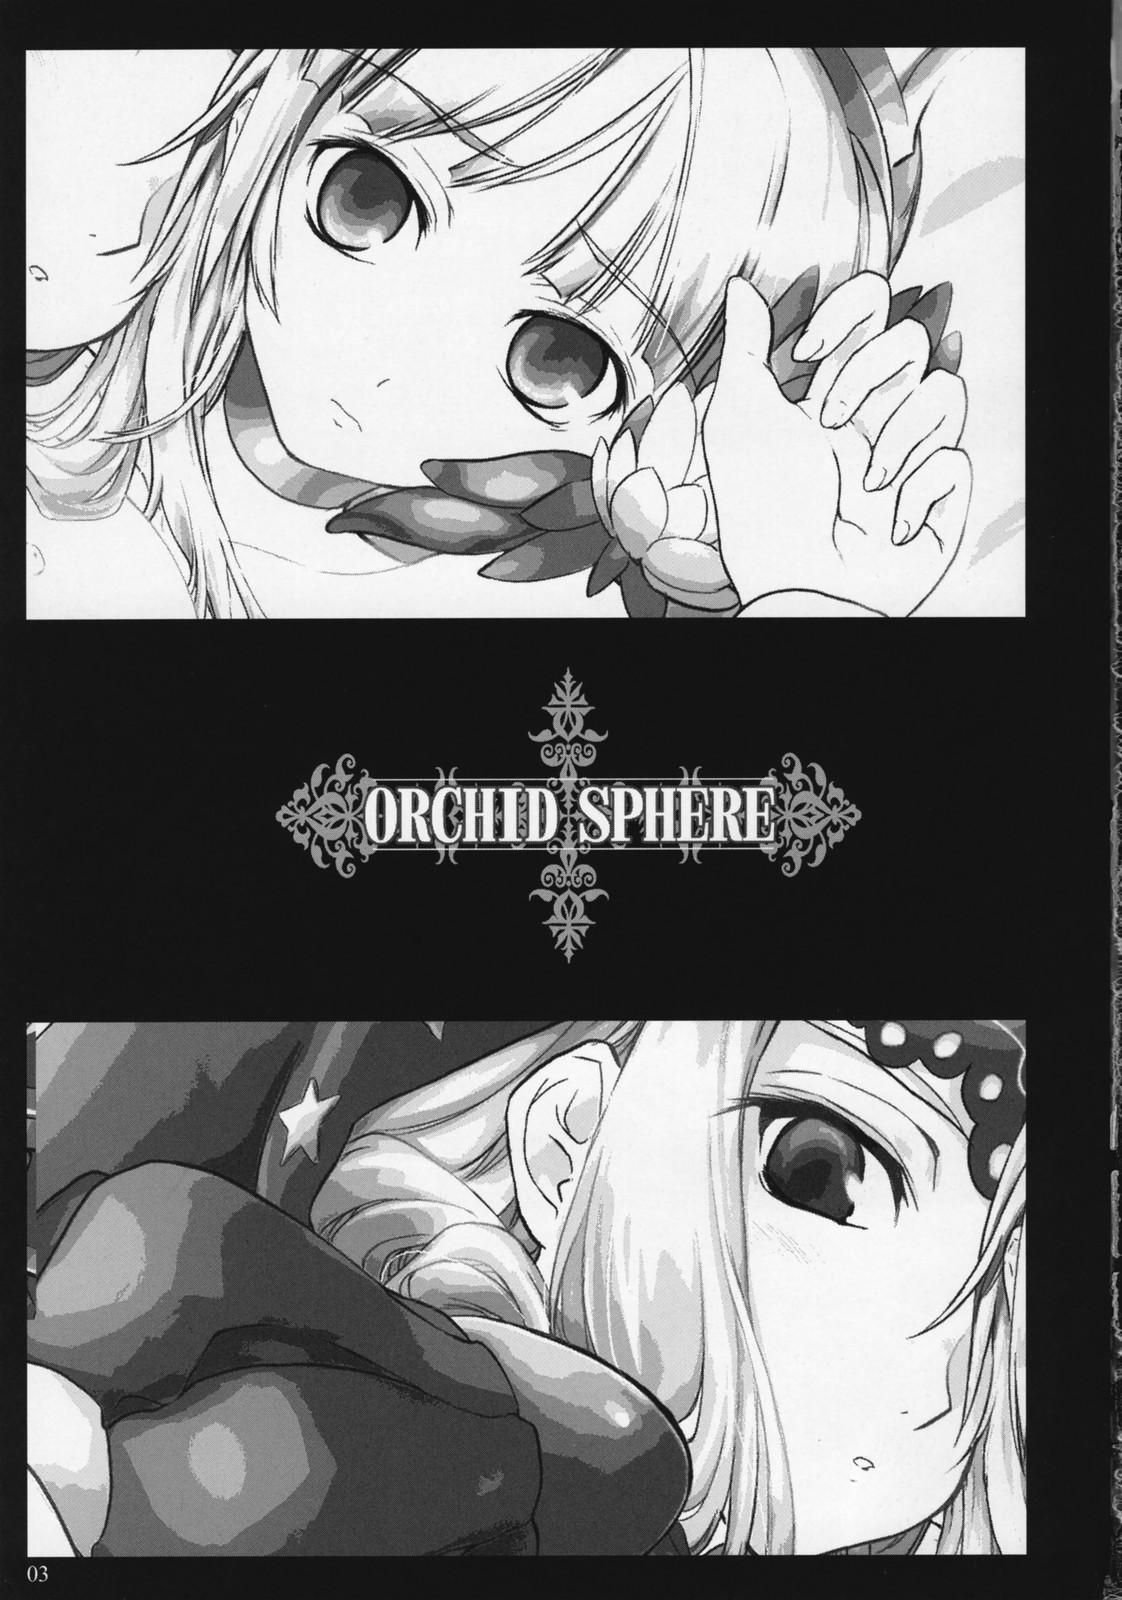 Peruana Orchid Sphere - Odin sphere Mas - Page 2